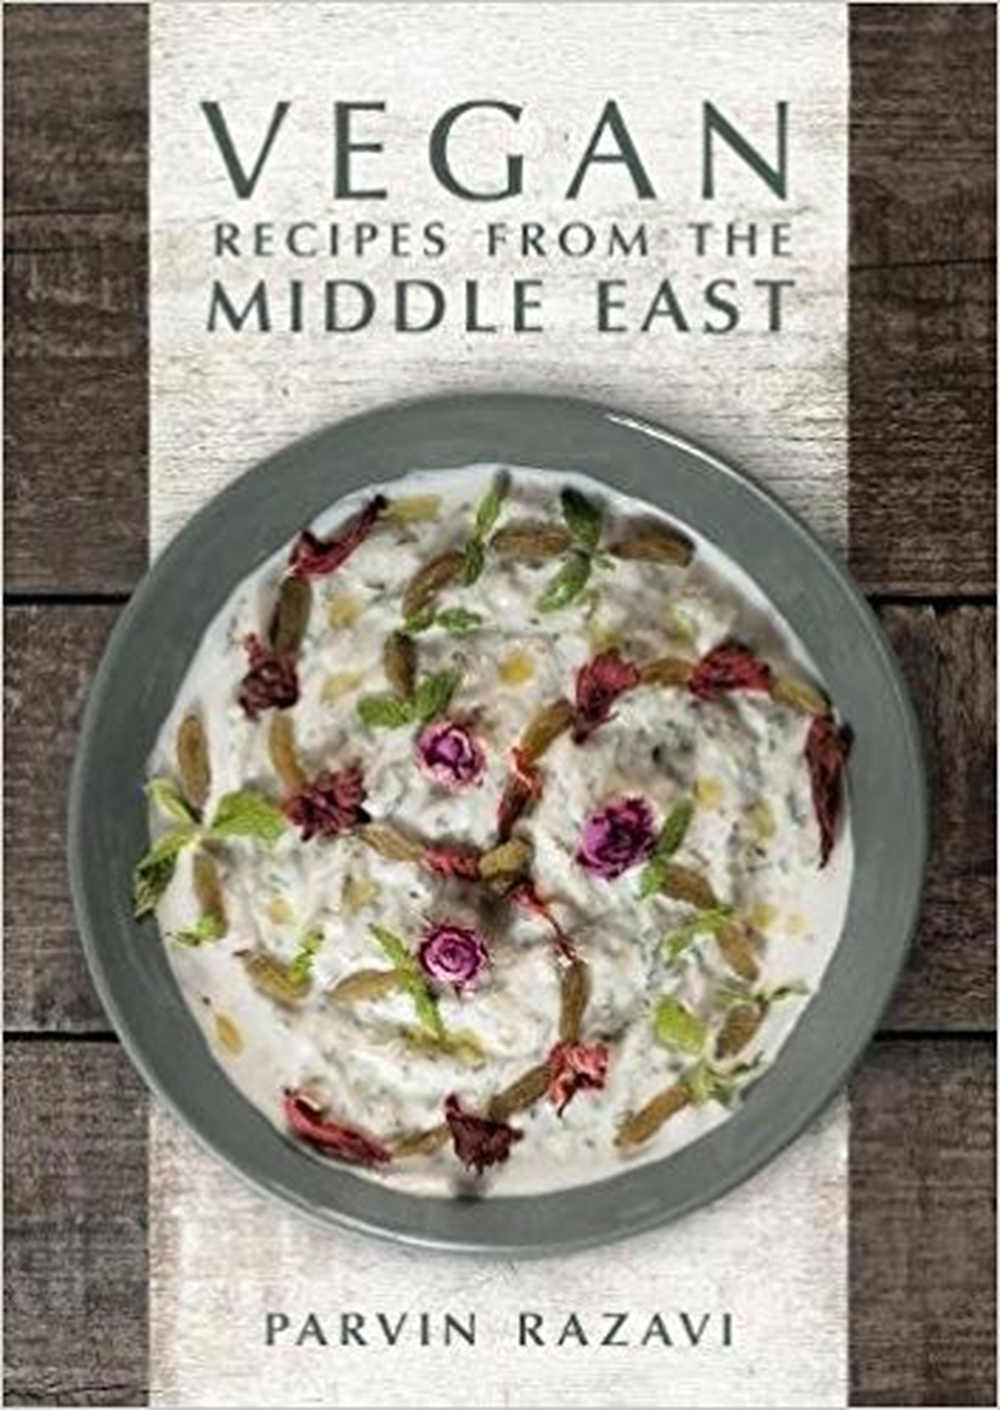 VEGAN Recipes from the Middle East, Parvin Razavi, published by Grub Street, London